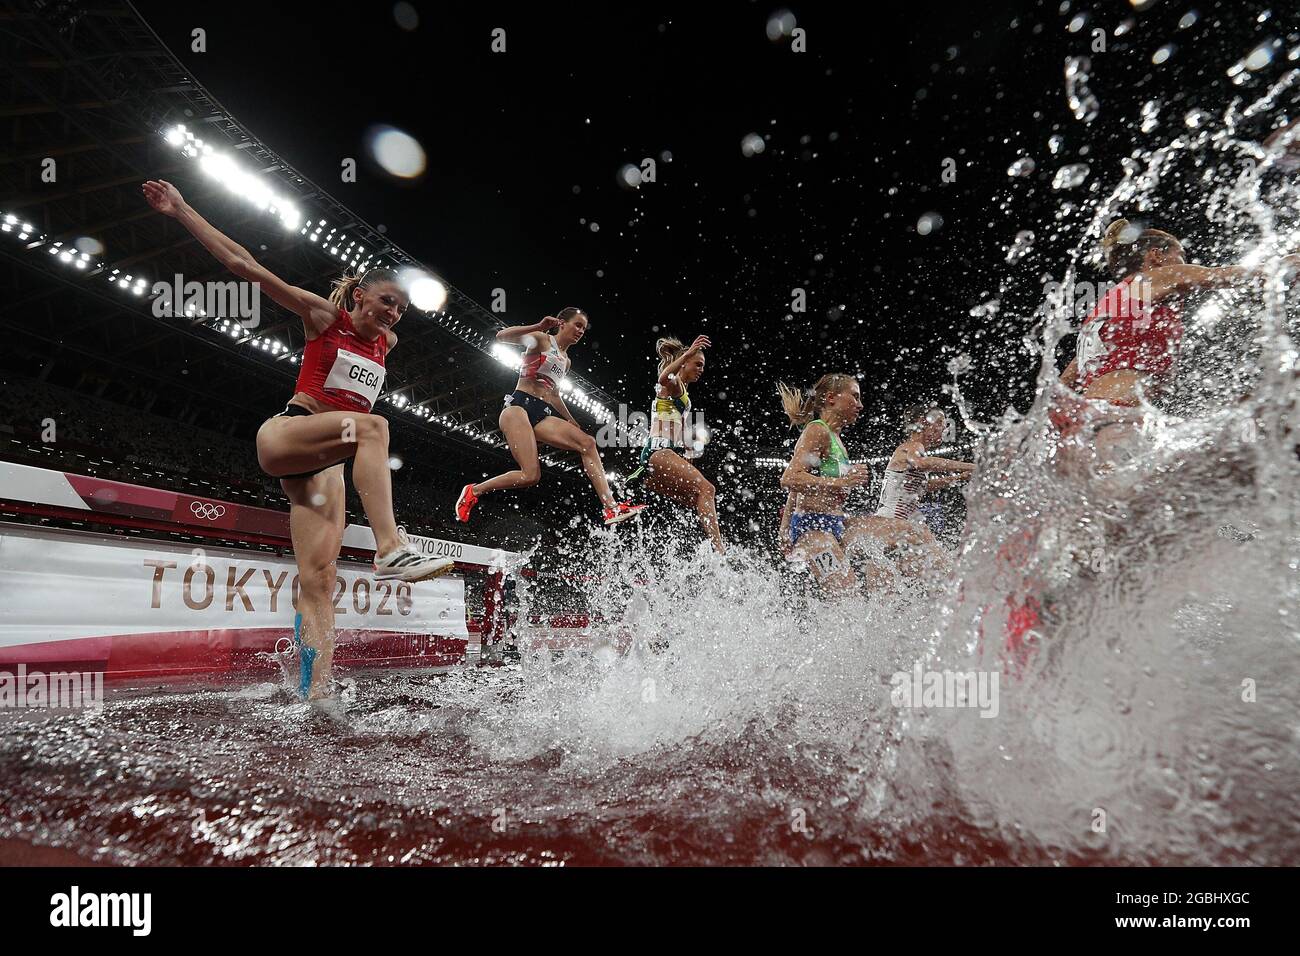 Tokyo, Japan. 4th Aug, 2021. Luiza Gega (L) of Albania competes during the women's 3000m steeplechase final at Tokyo 2020 Olympic Games, in Tokyo, Japan, Aug. 4, 2021. Credit: Li Ming/Xinhua/Alamy Live News Stock Photo